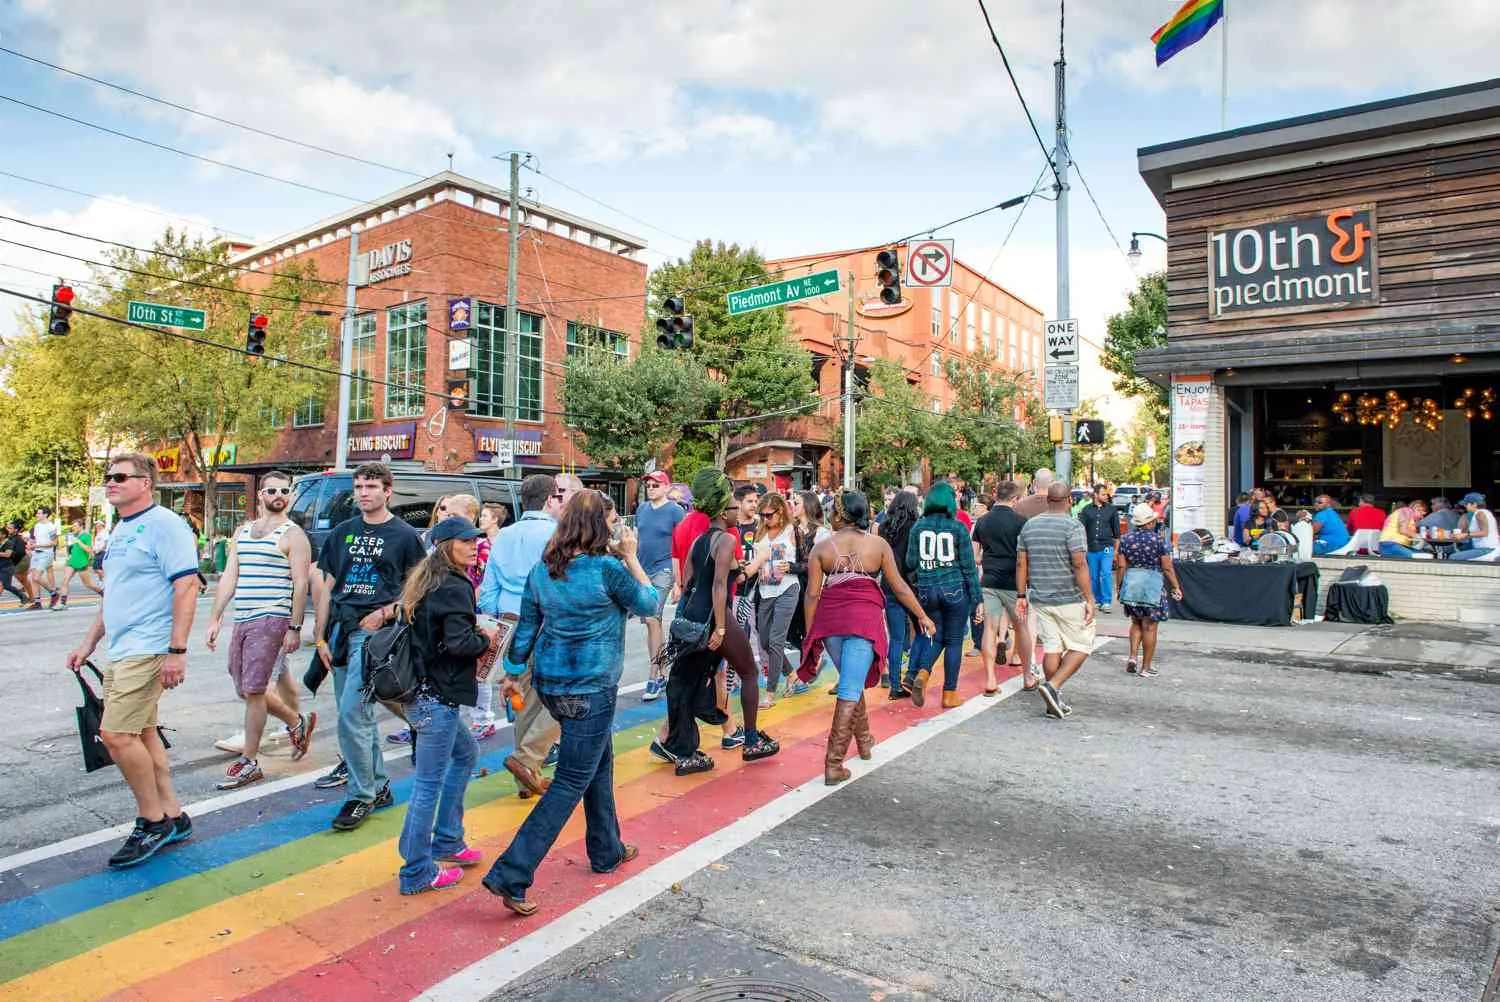 the city of Atlanta, Georgia was named the most LGBTQ friendly city in the state